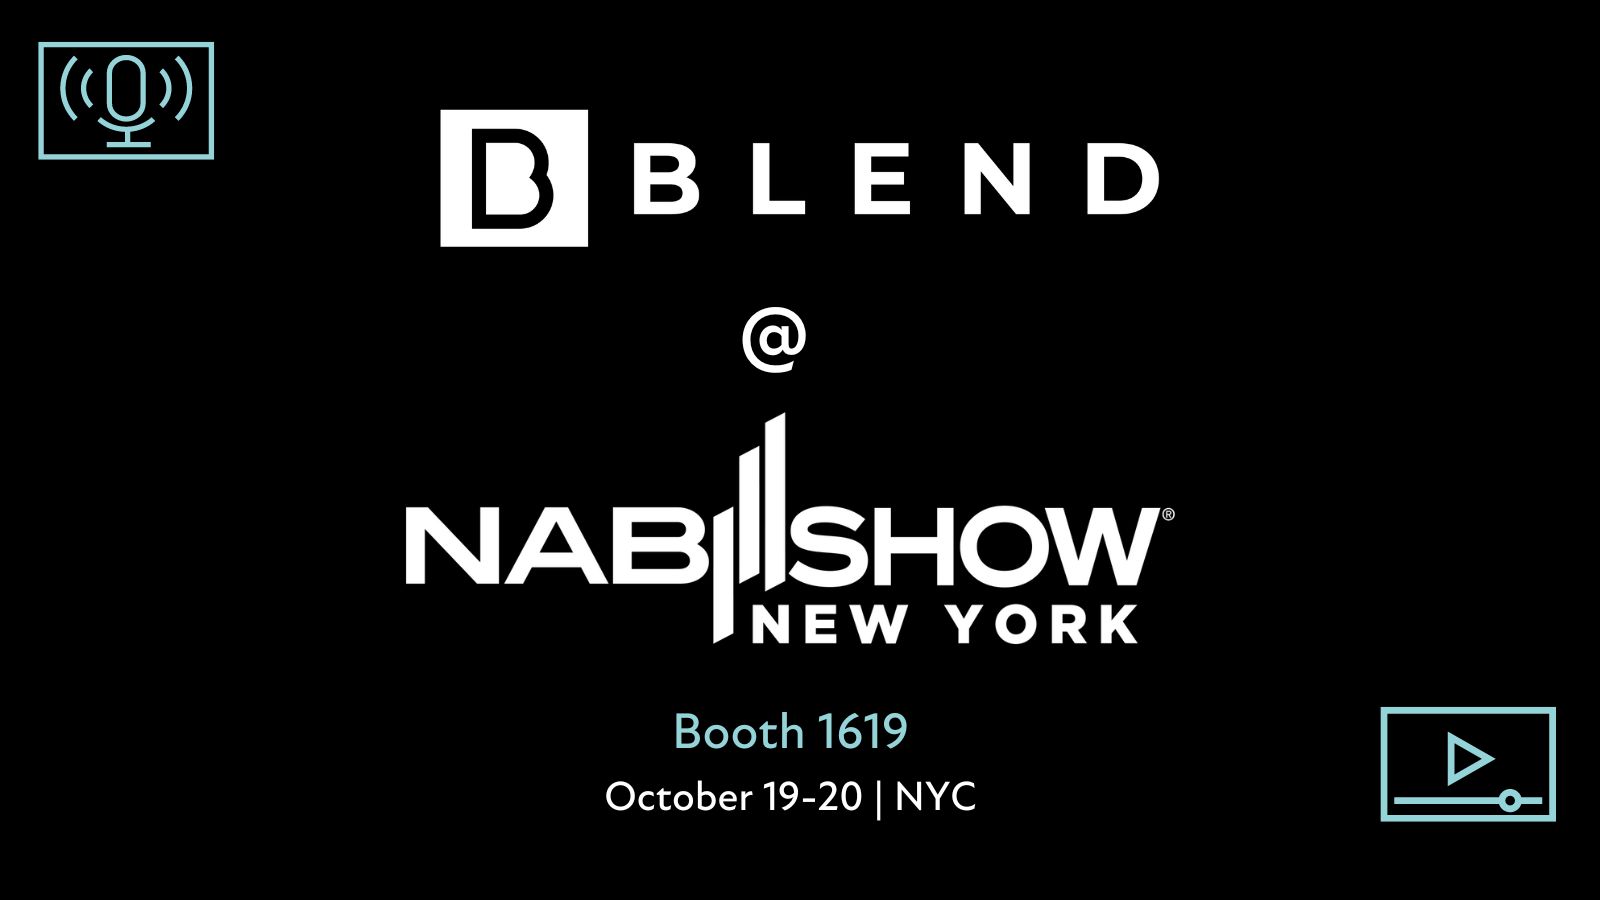 BLEND to Debut Expansion into Media and Entertainment Space as an Exhibitor at NAB New York Conference October 19-20